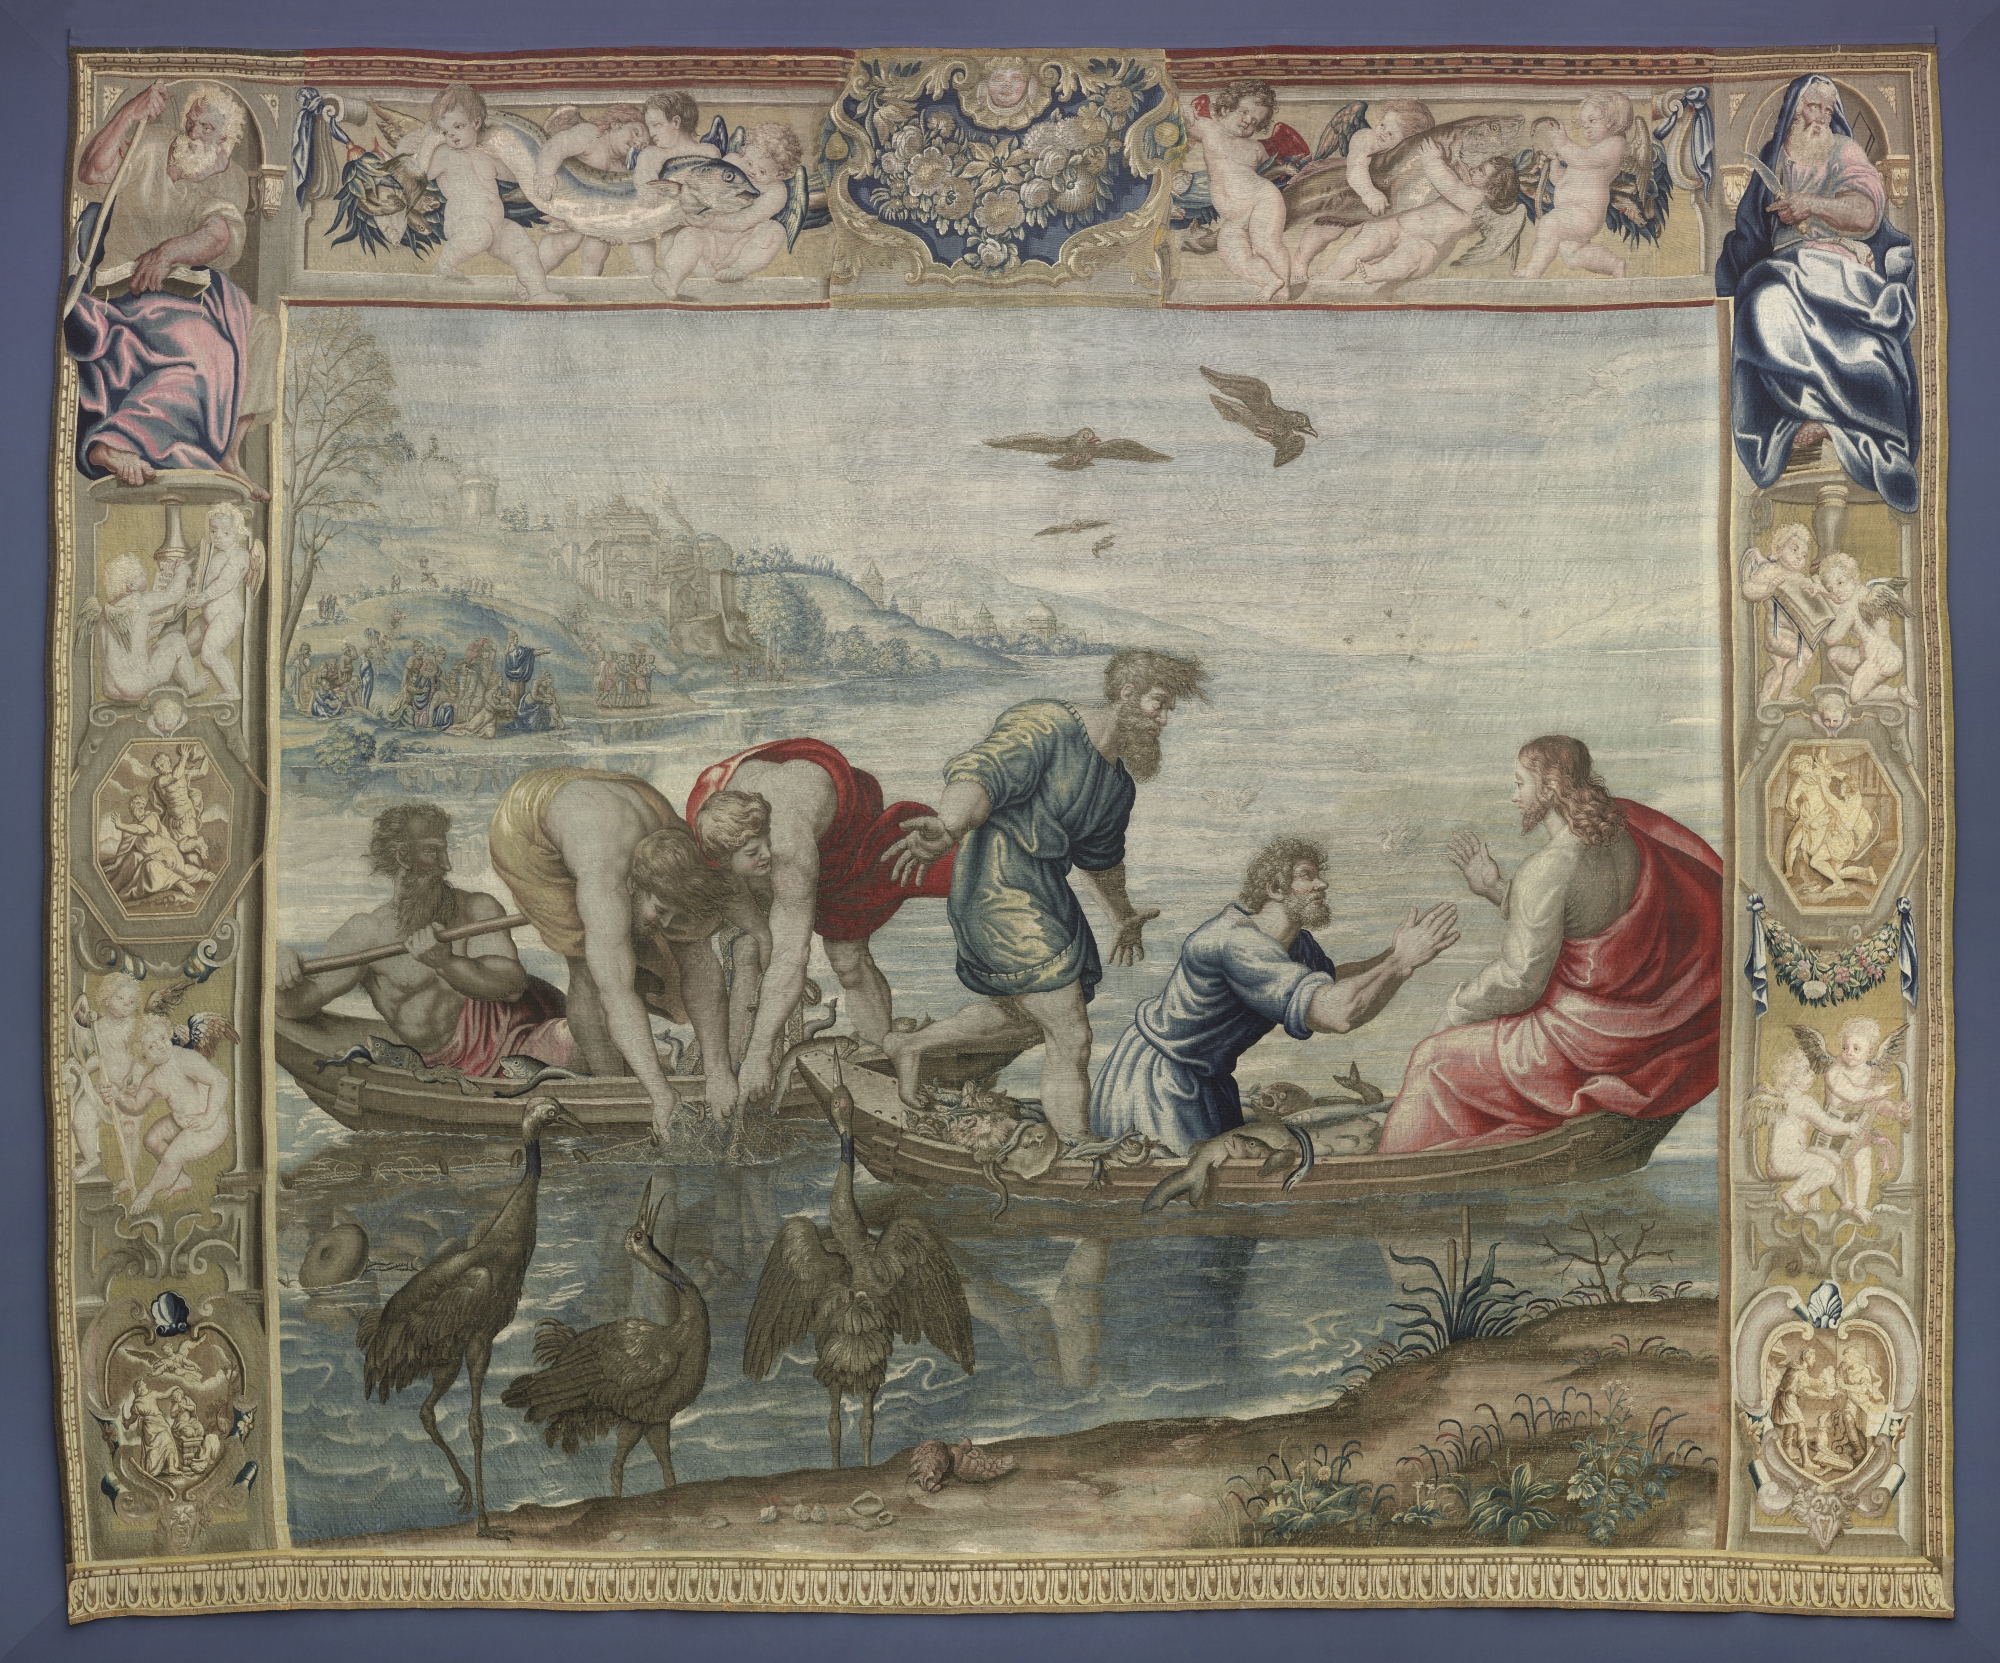 Mortlake Tapestry Manufactory (after designs by Raphael), The Miraculous Draft of fishes, after 1625. Tapestry, Staaliche Kunstsammlugen Dresden, Gemäldegalerie Alte Meister. CONTRIBUTED